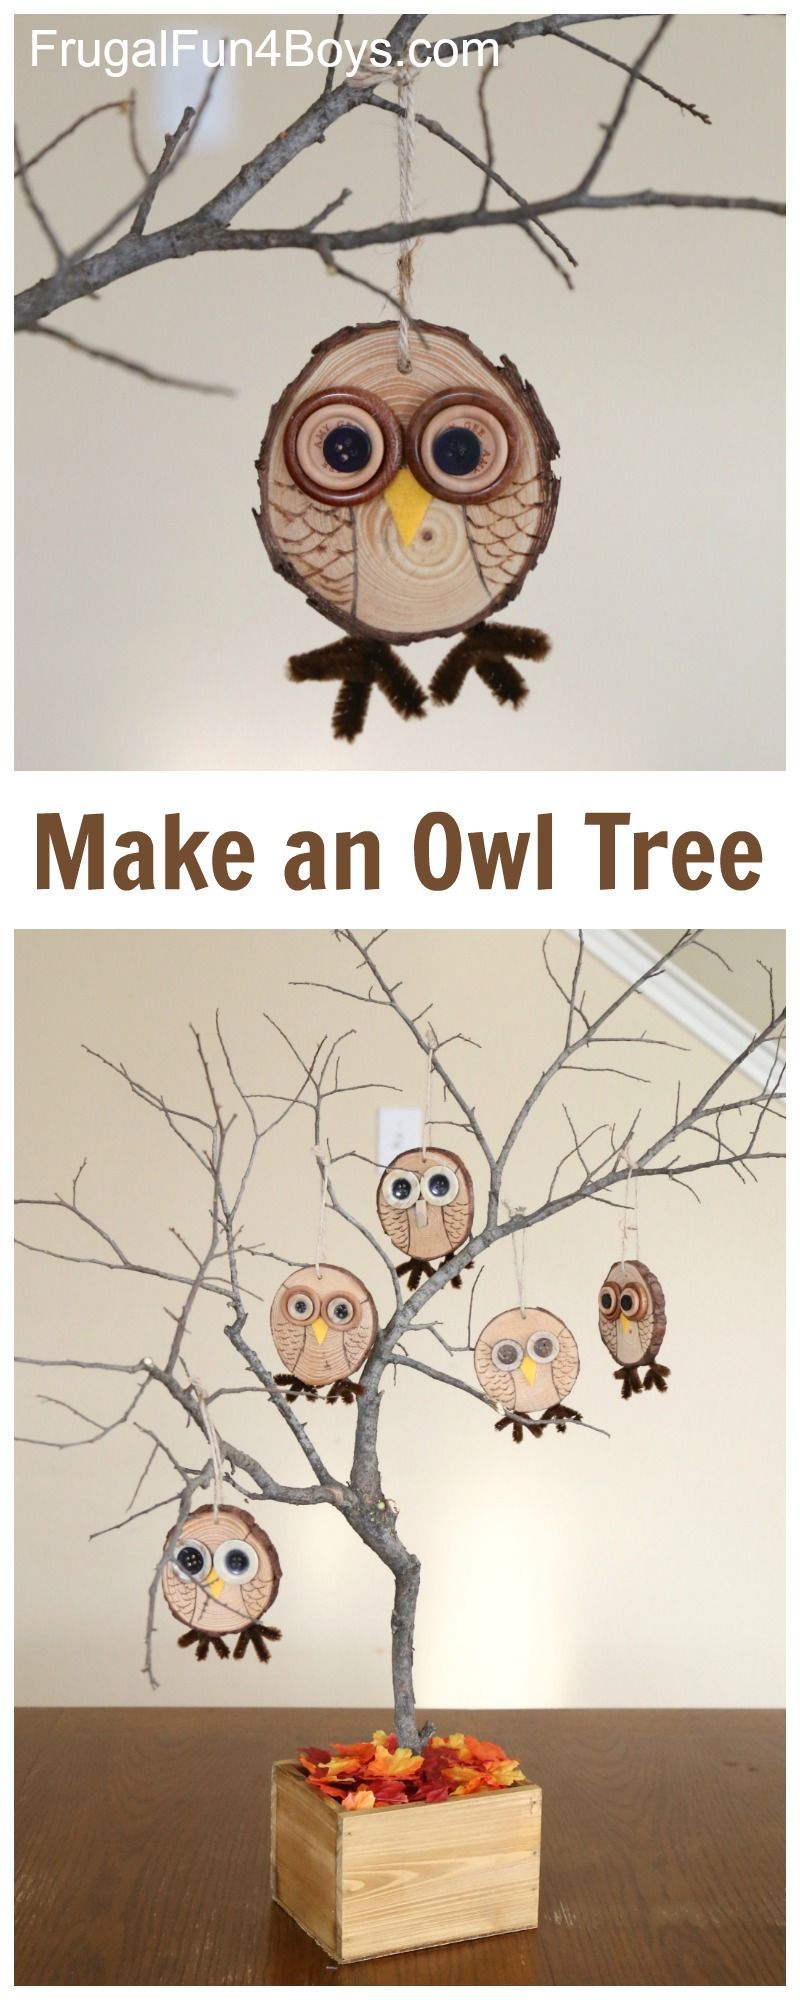 Here’s an owl craft that is both fun and adorable! Create wood slice owl ornaments with button eyes. Then display them on an owl